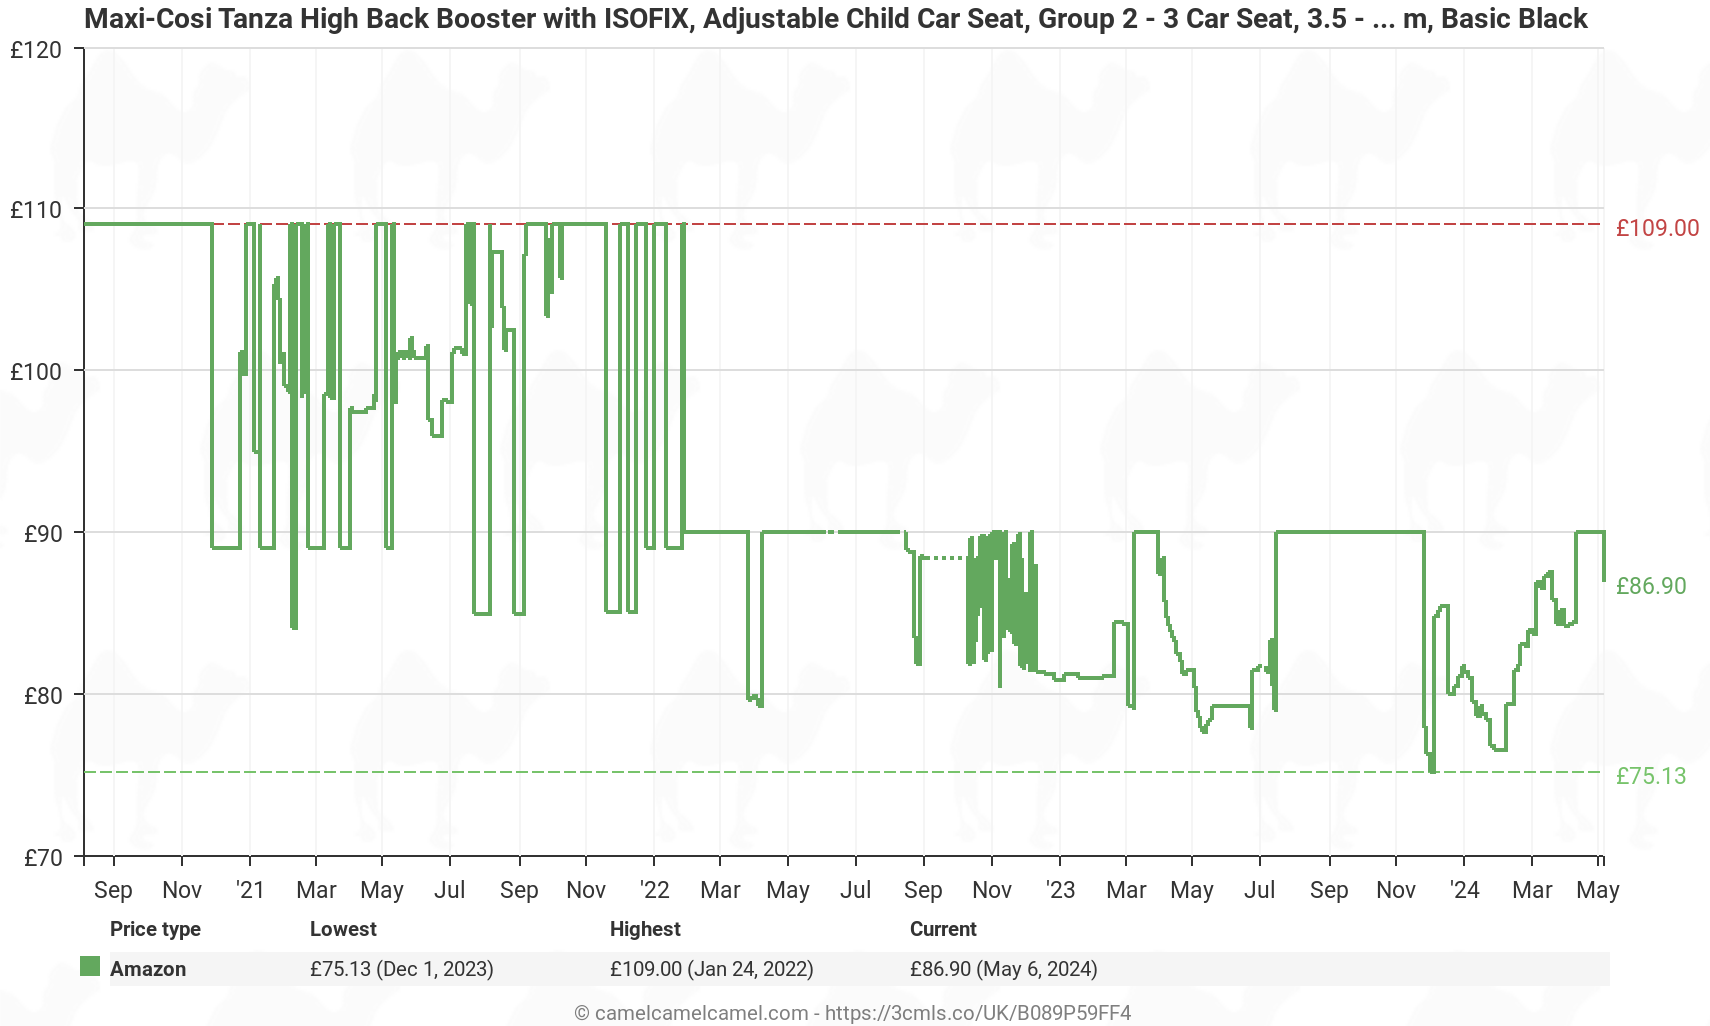 Maxi-Cosi Tanza High Back Booster with ISOFIX, Adjustable Child Car Seat, Group 2-3 Car Seat, 3.5 - 12 years, 100 - 150 cm, Basic Black - Price History: B089P59FF4